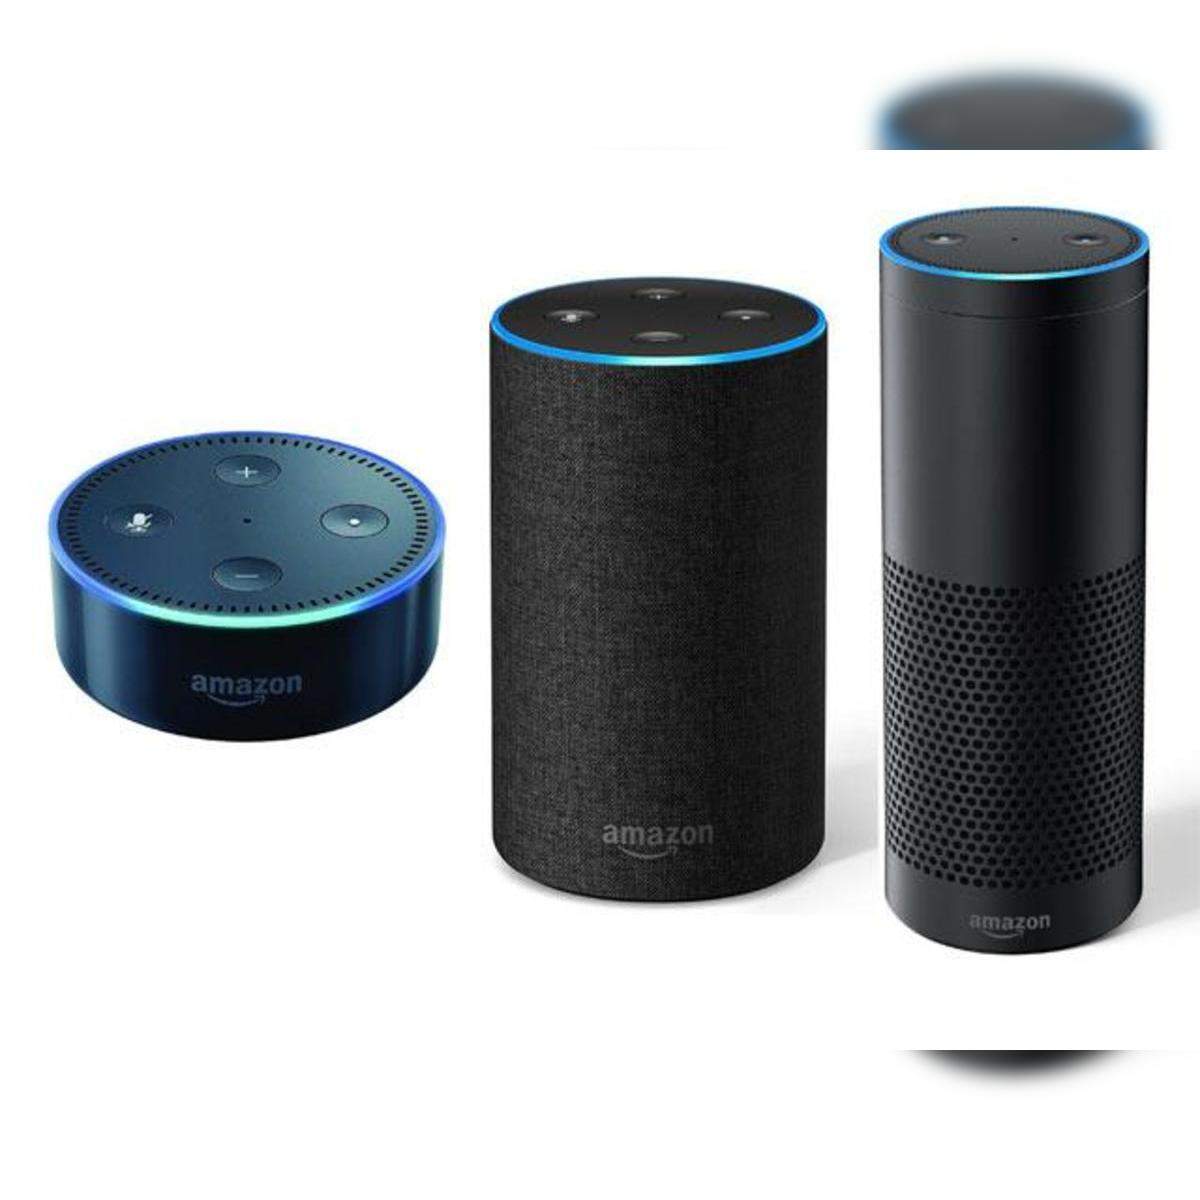 echo series: Add a voice to your home with 's new Echo series  - The Economic Times